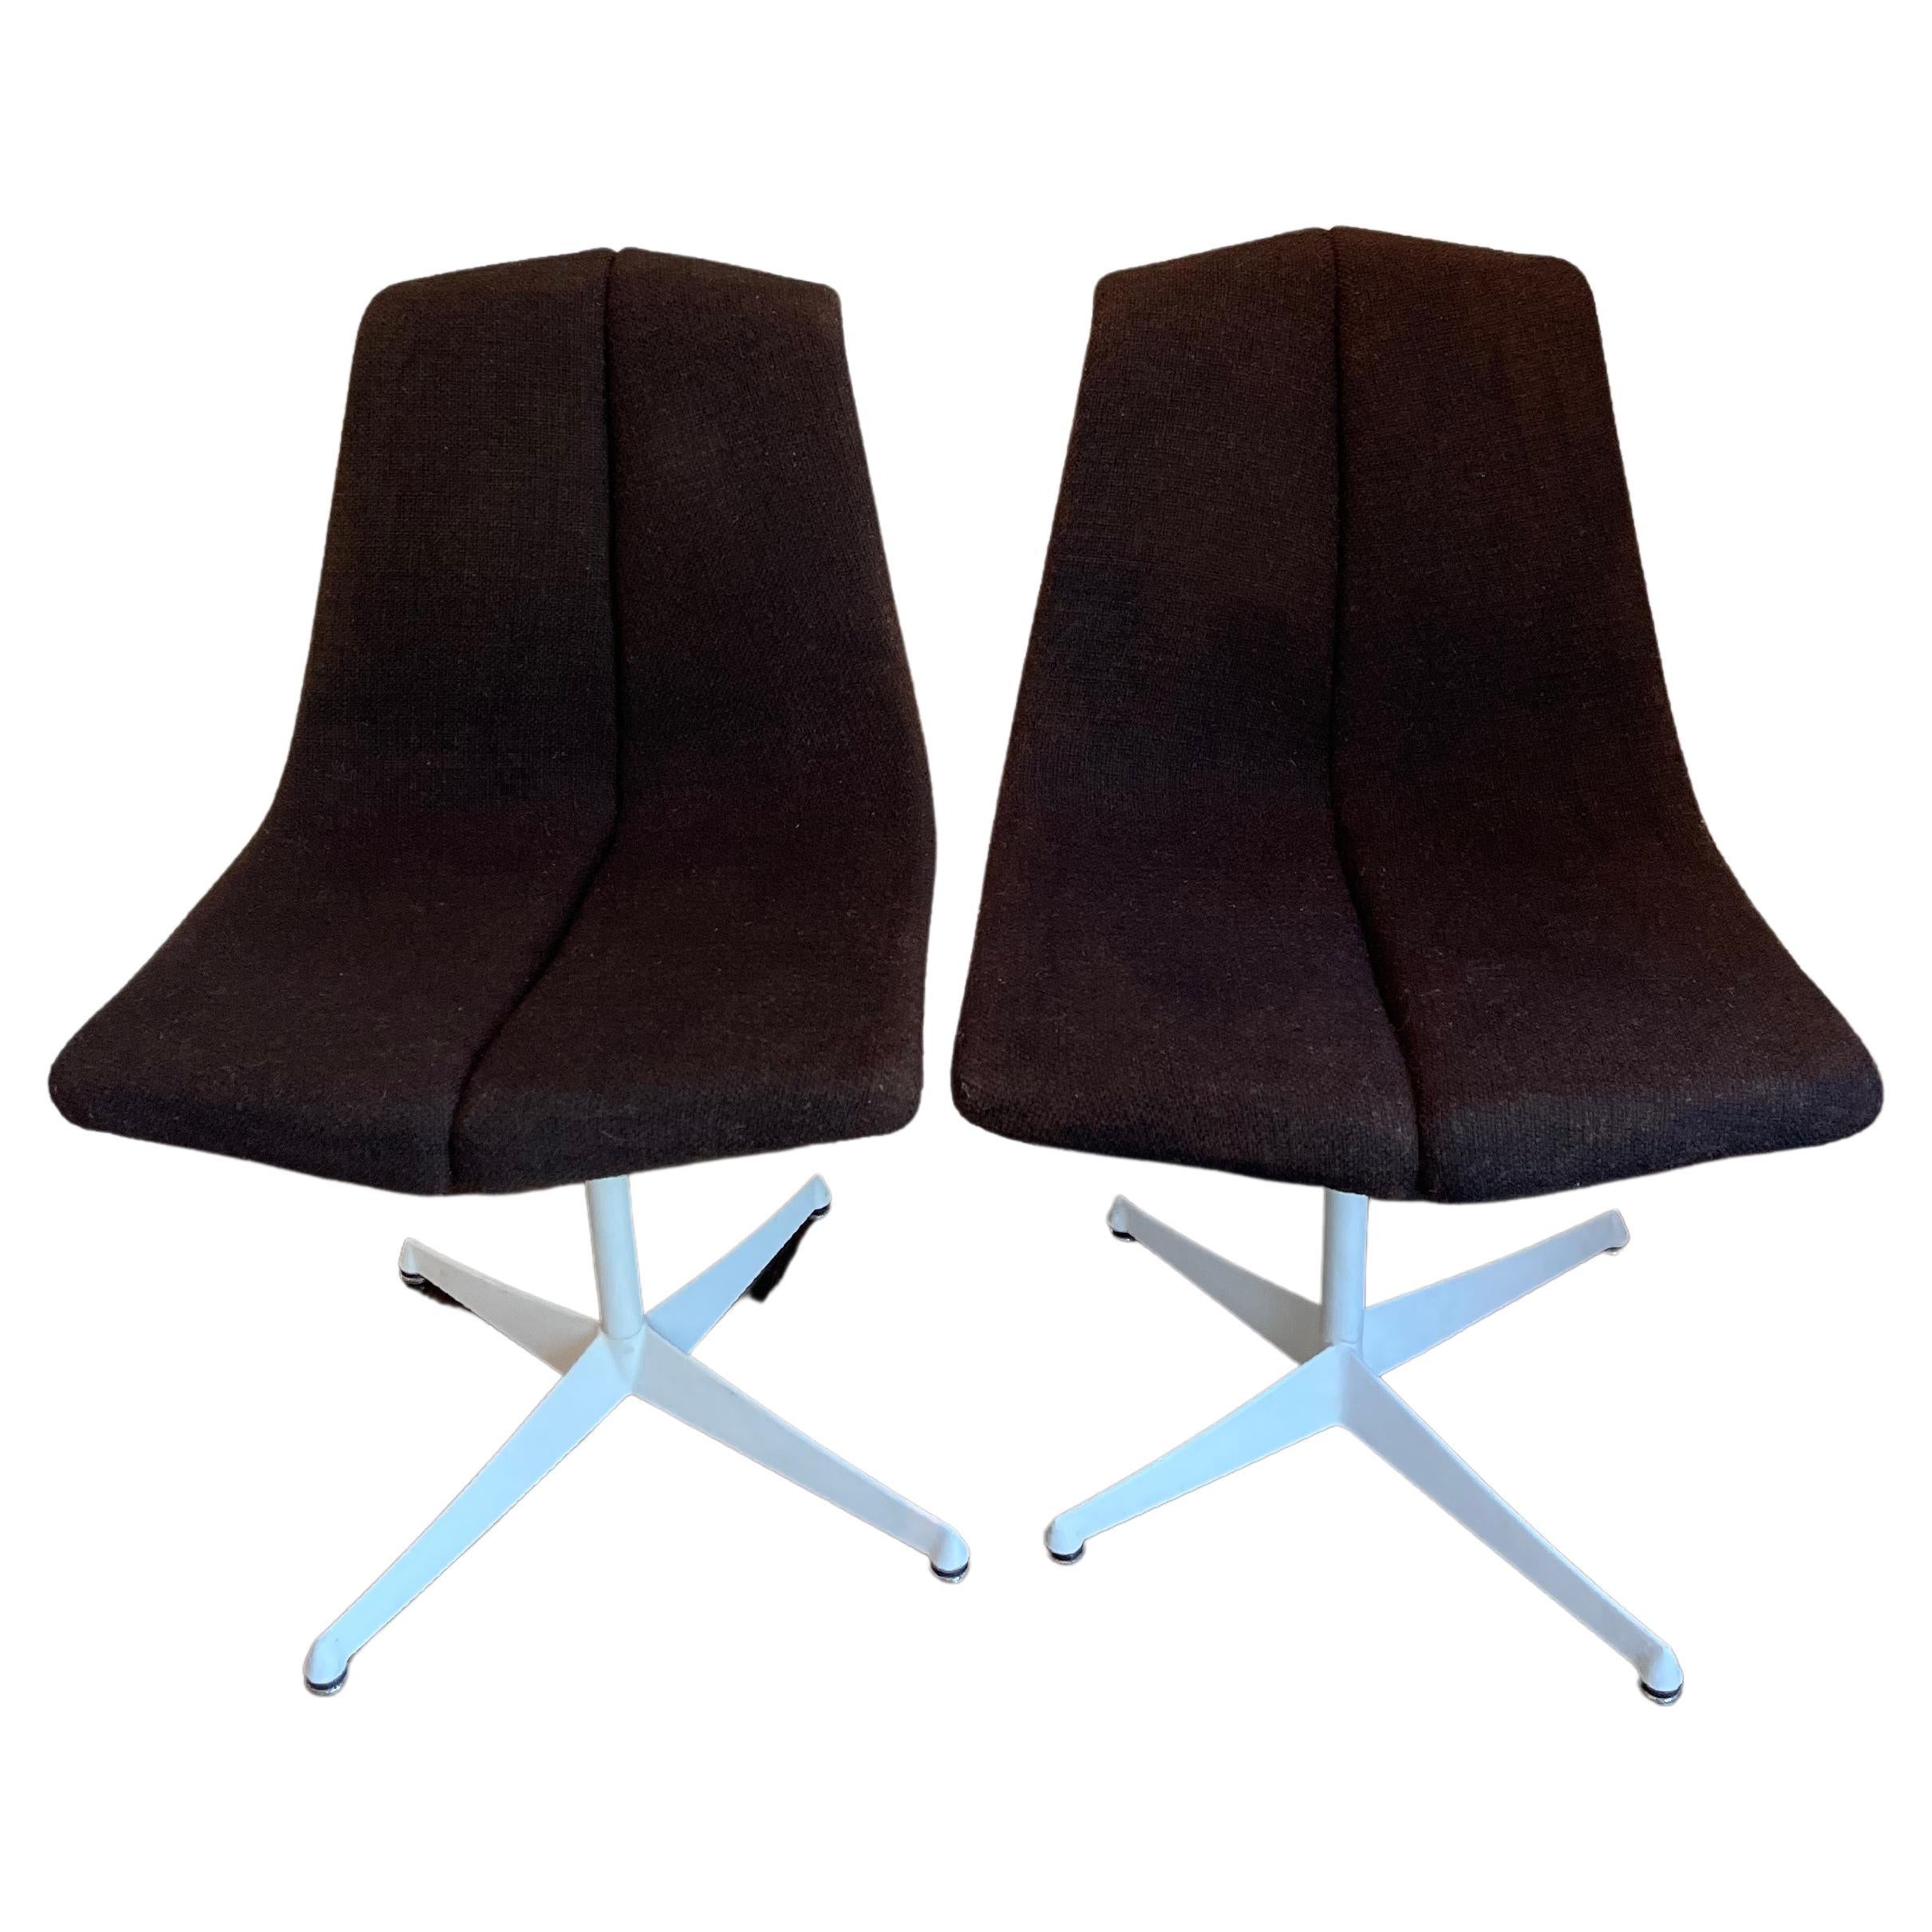 Pair of Richard Schultz by Knoll Mid Century Modern Chairs For Sale